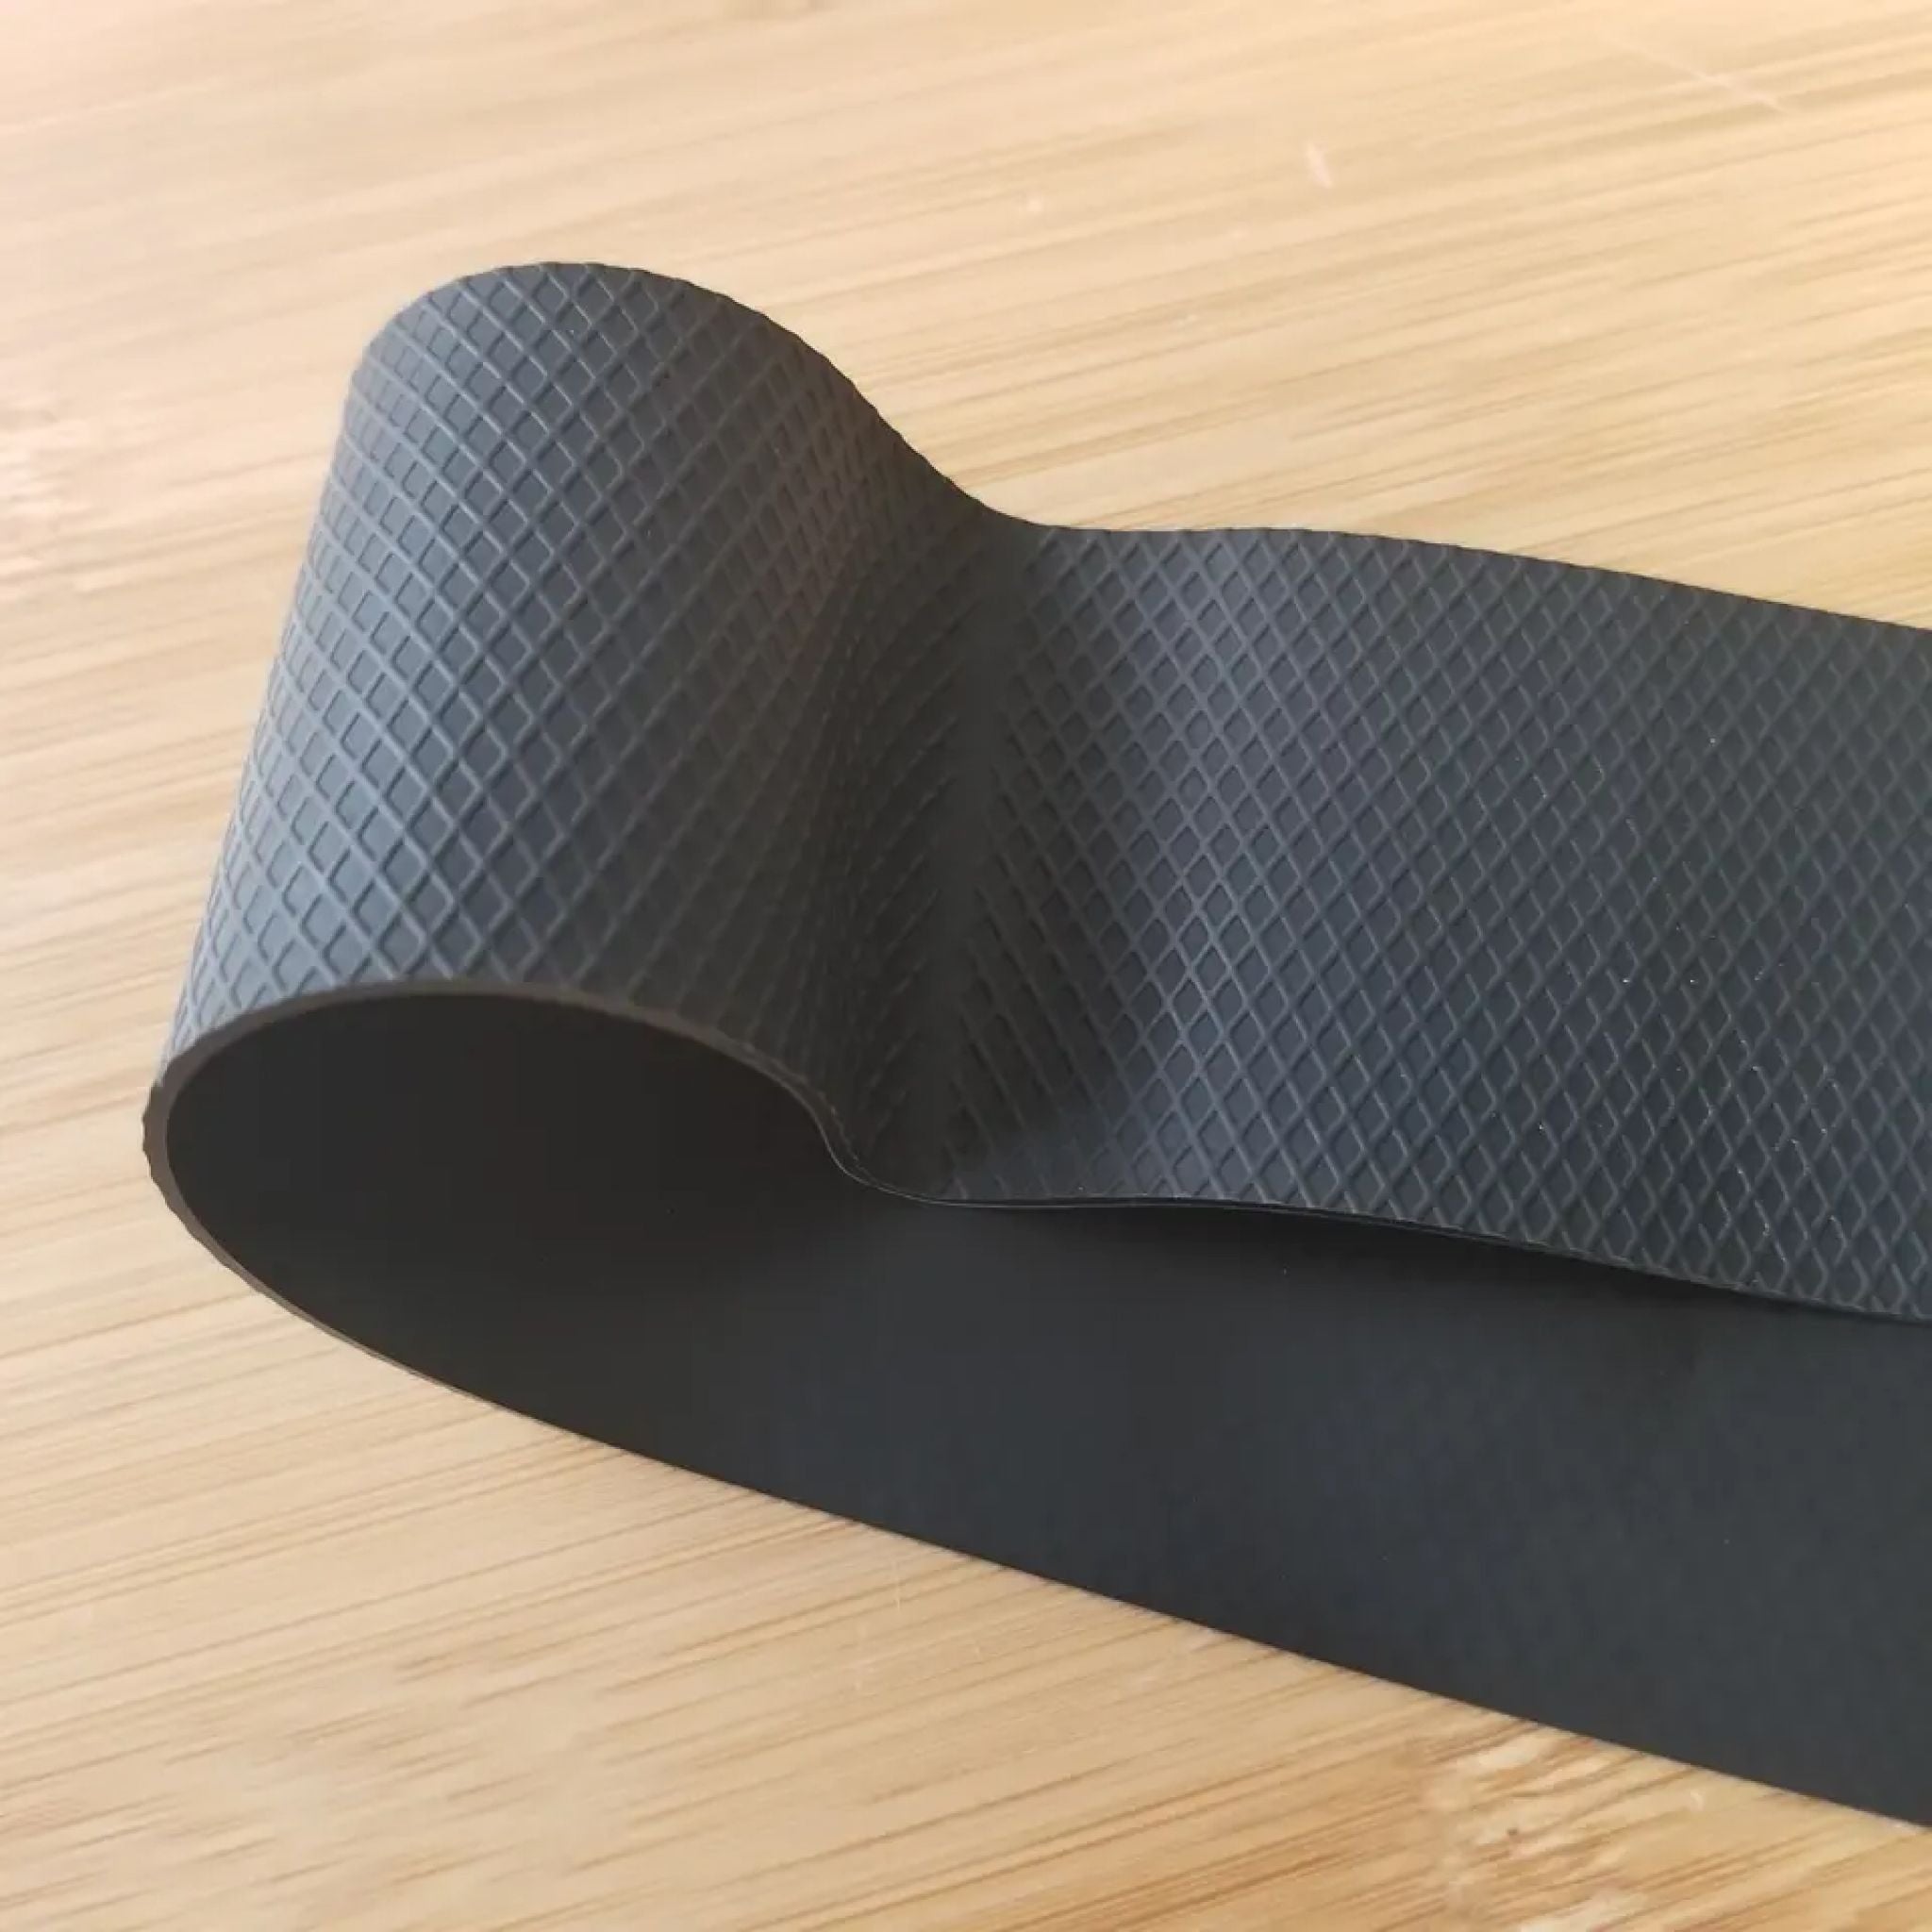 Closeup of the Fold on the Black 3D Grip Latex Resistance Band Set